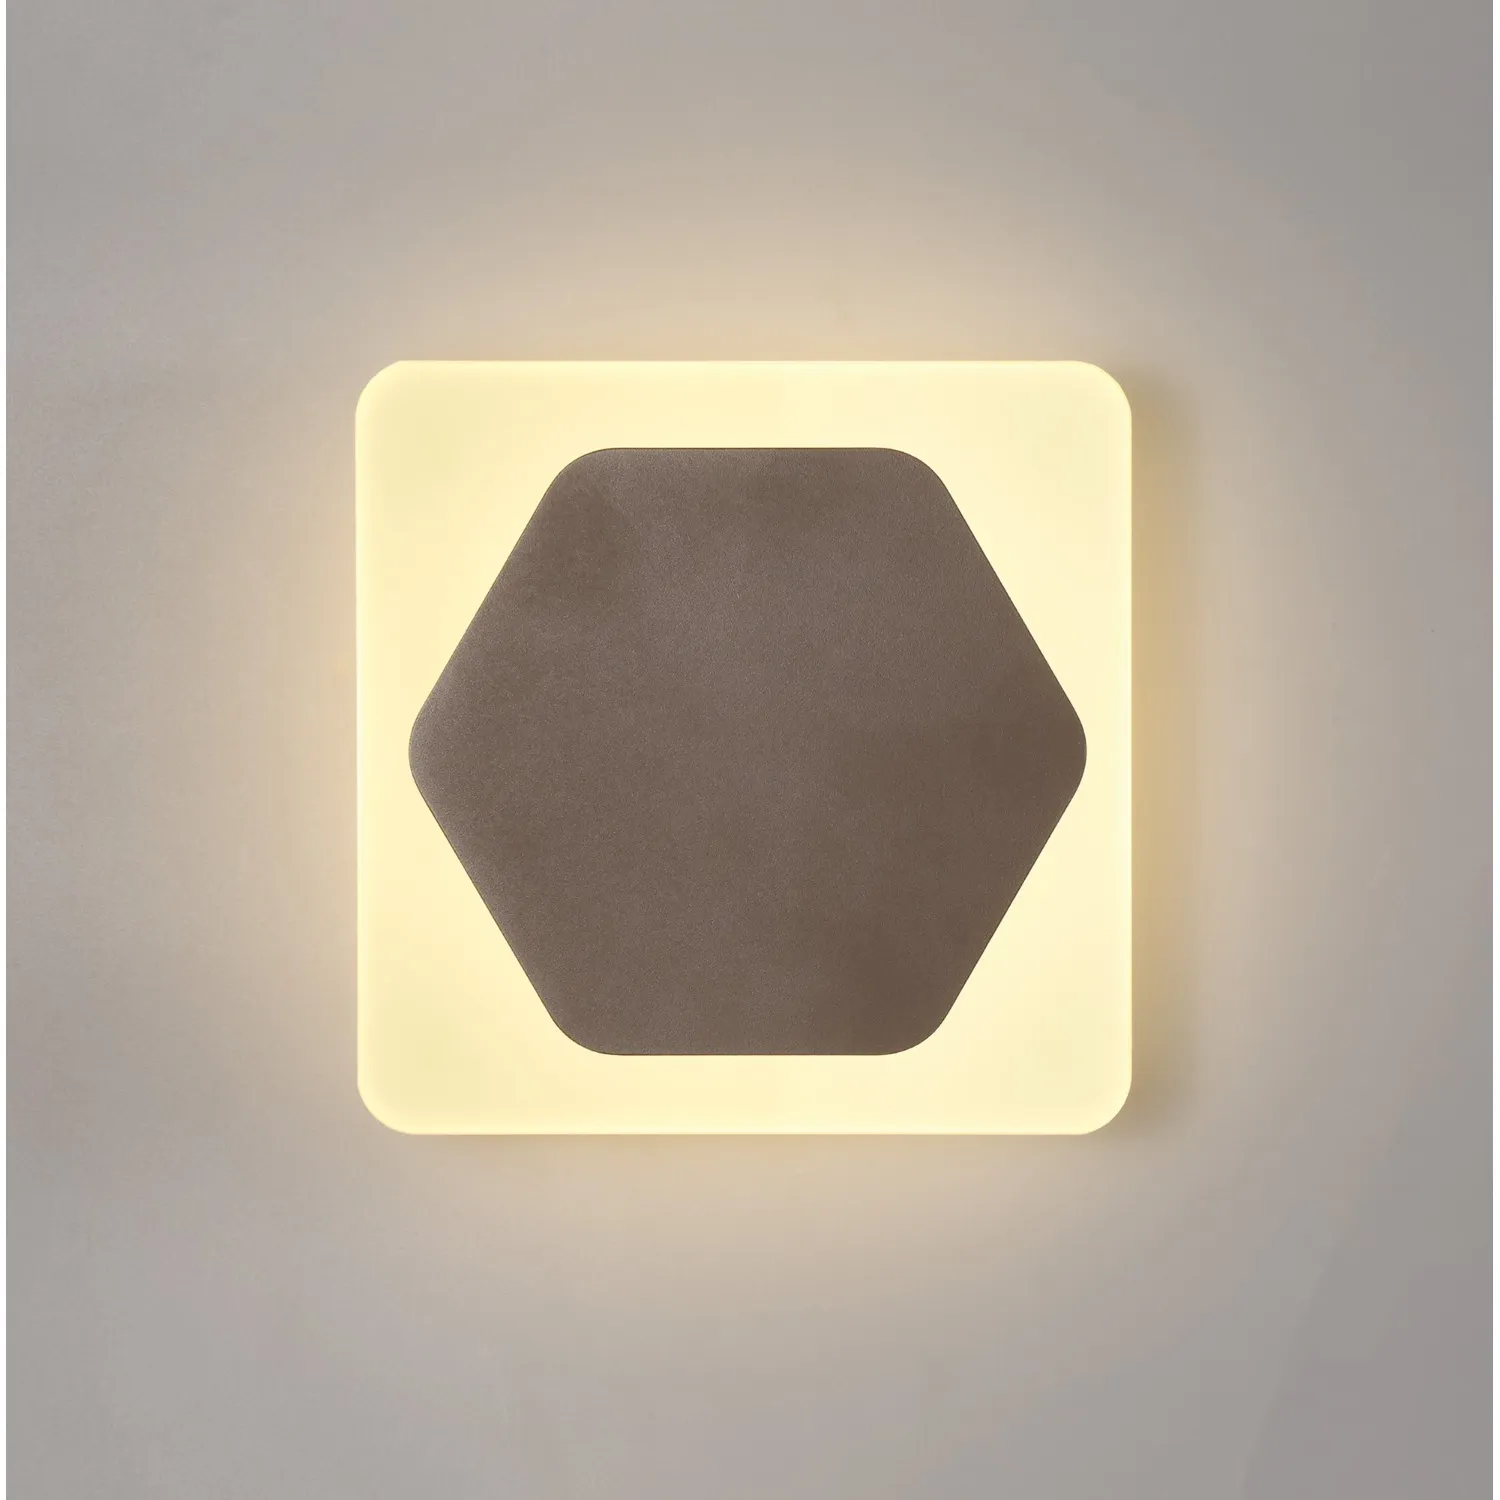 Edgware Magnetic Base Wall Lamp, 12W LED 3000K 498lm, 15cm Horizontal Hexagonal 19cm Square Centre, Coffee Acrylic Frosted Diffuser